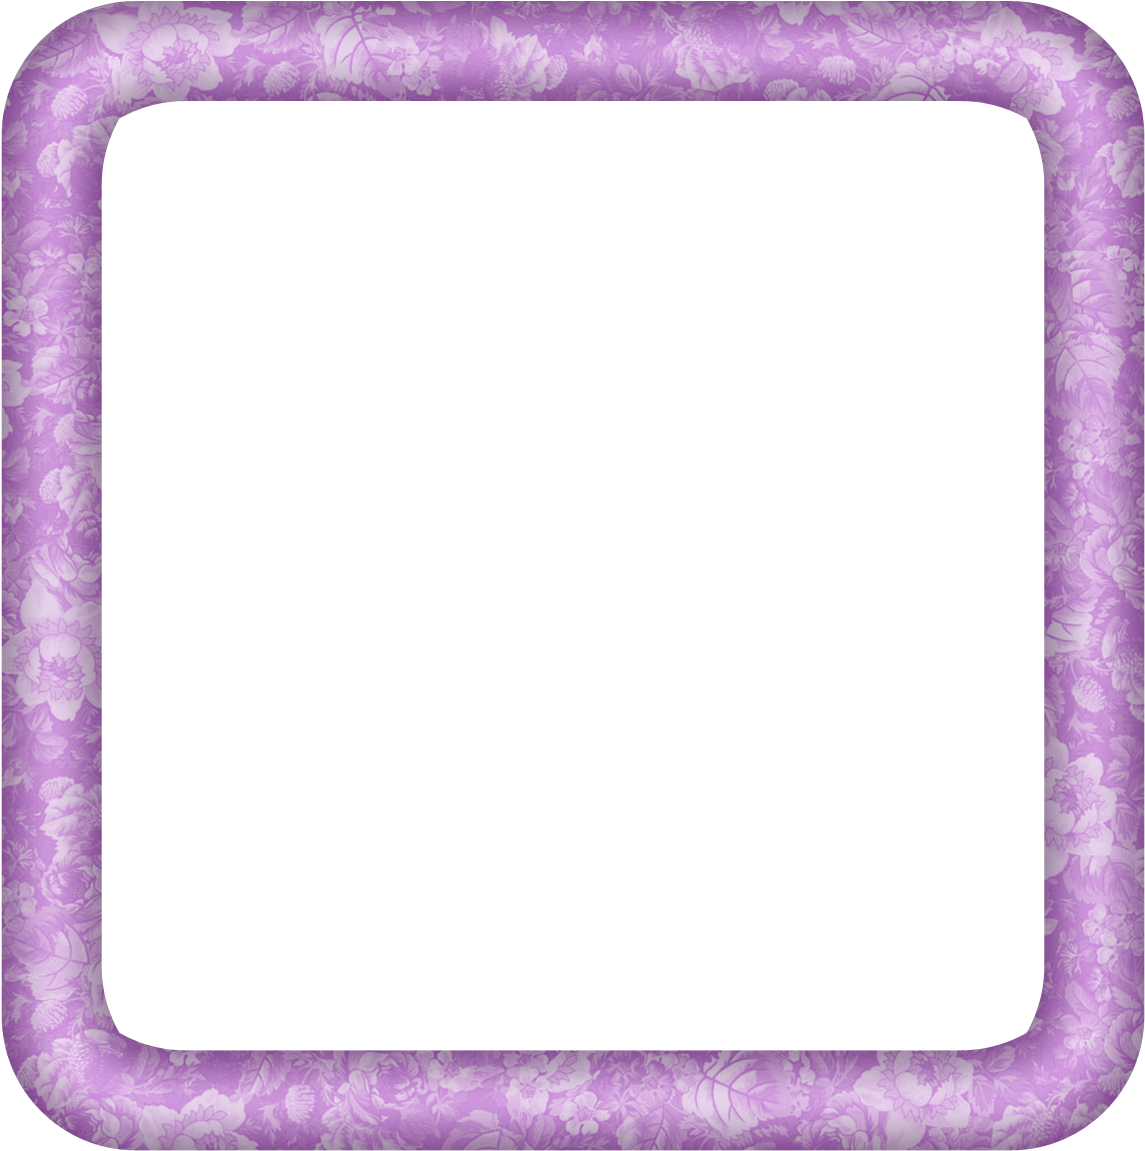 A Purple And White Floral Frame